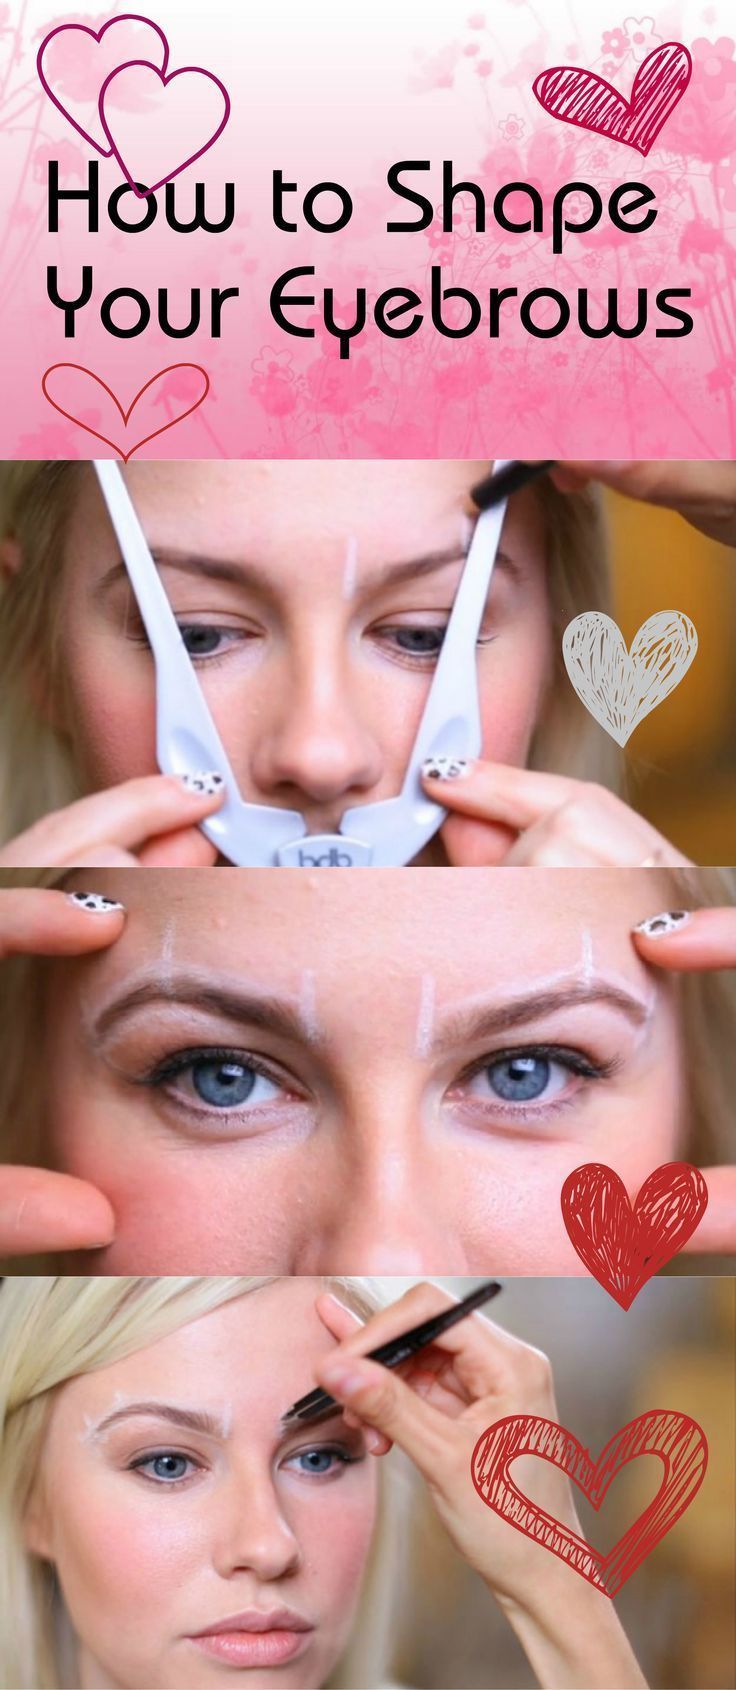 How to Find the Shape of Your Eyebrows | Easy Beauty Tips and Tricks by Makeup T...